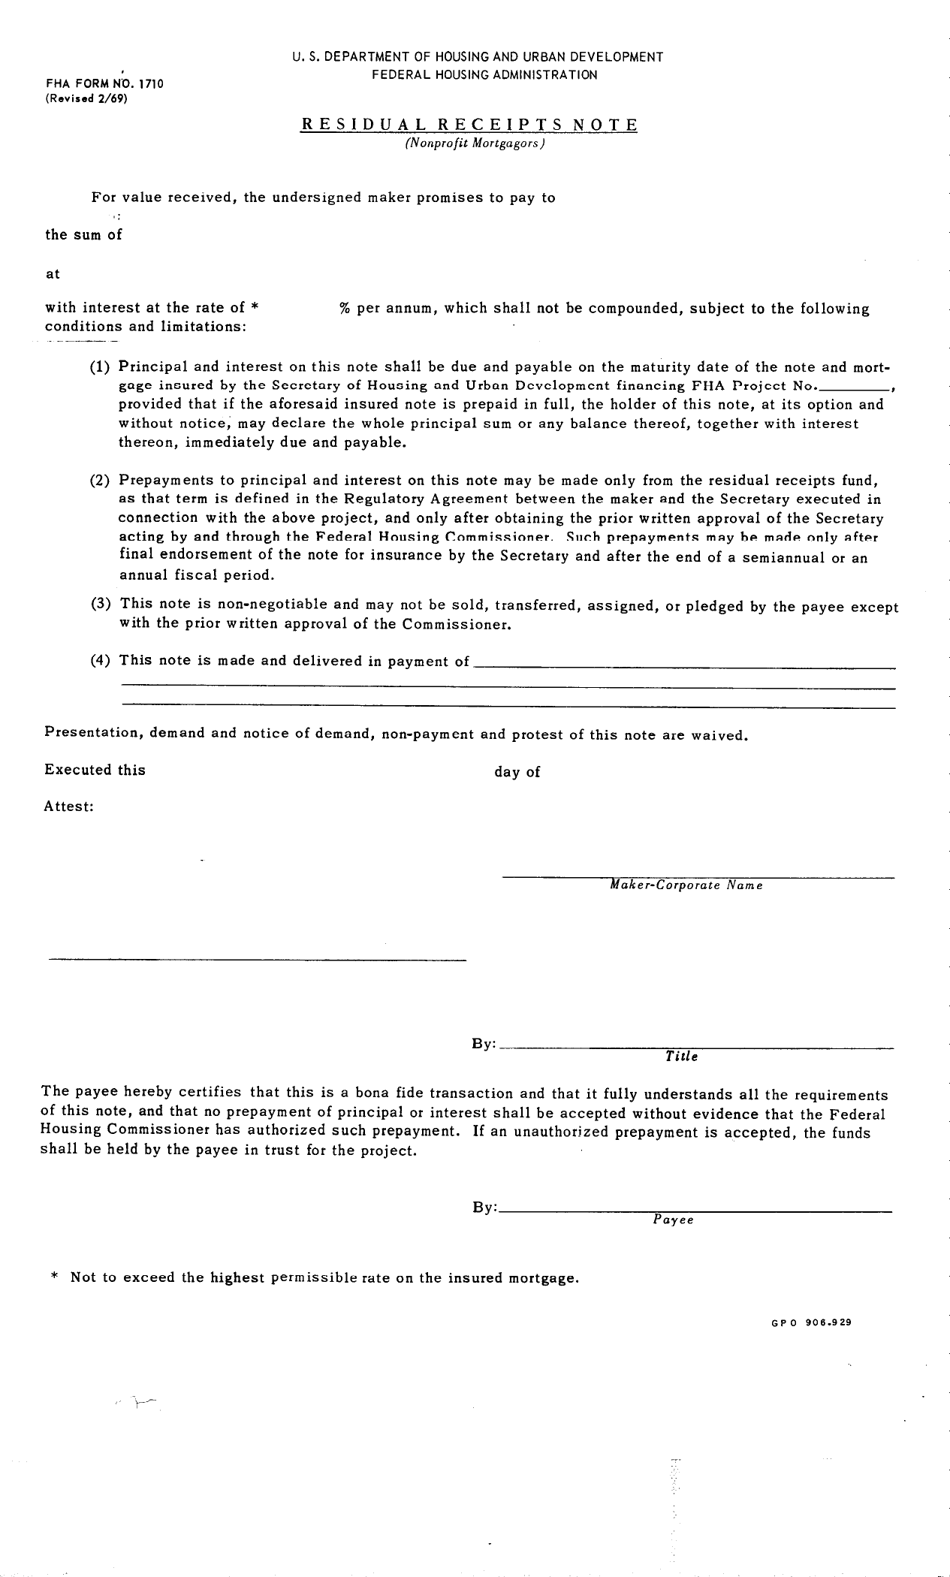 Form FHA-1710 Residual Receipts Note - Nonprofit Mortgageors, Page 1